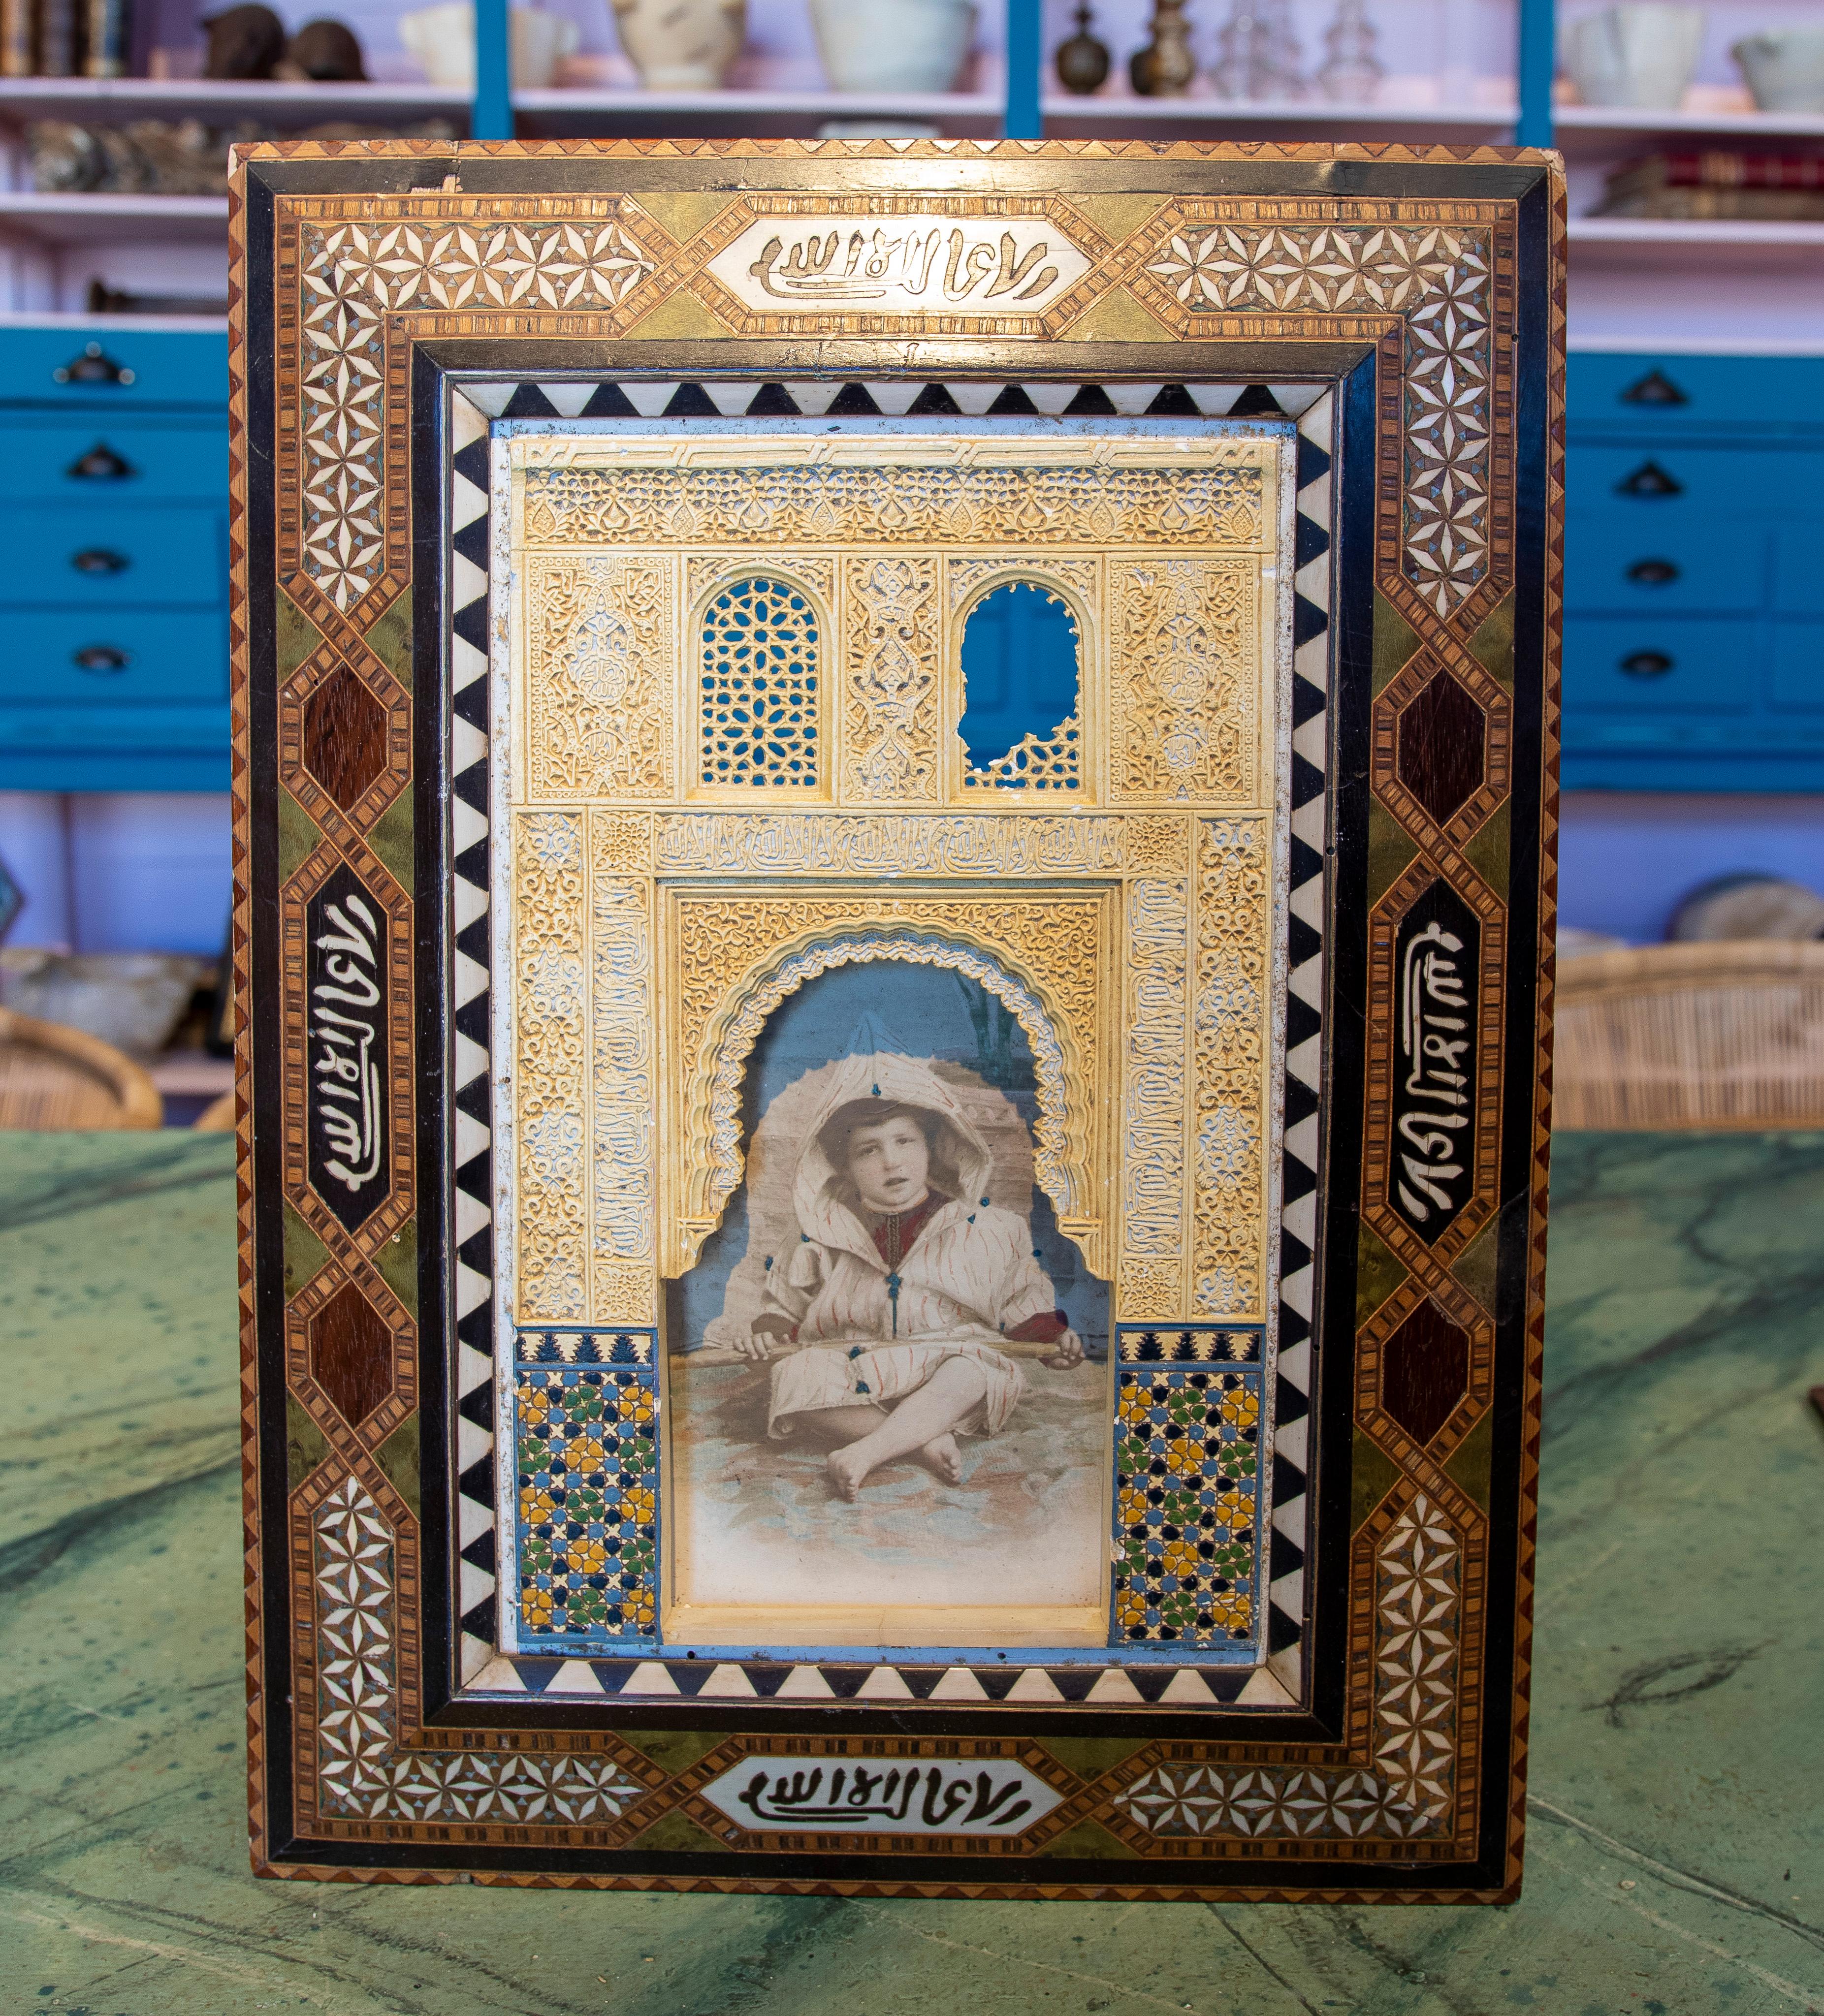 Rare 1960s Spanish detailed stucco relief showcasing Mudéjar art during Al-Andalus, exquisitely framed with a bone inlay decorative frame and with a real photo inset. 

Interior dimensions: 29x18,5cm.